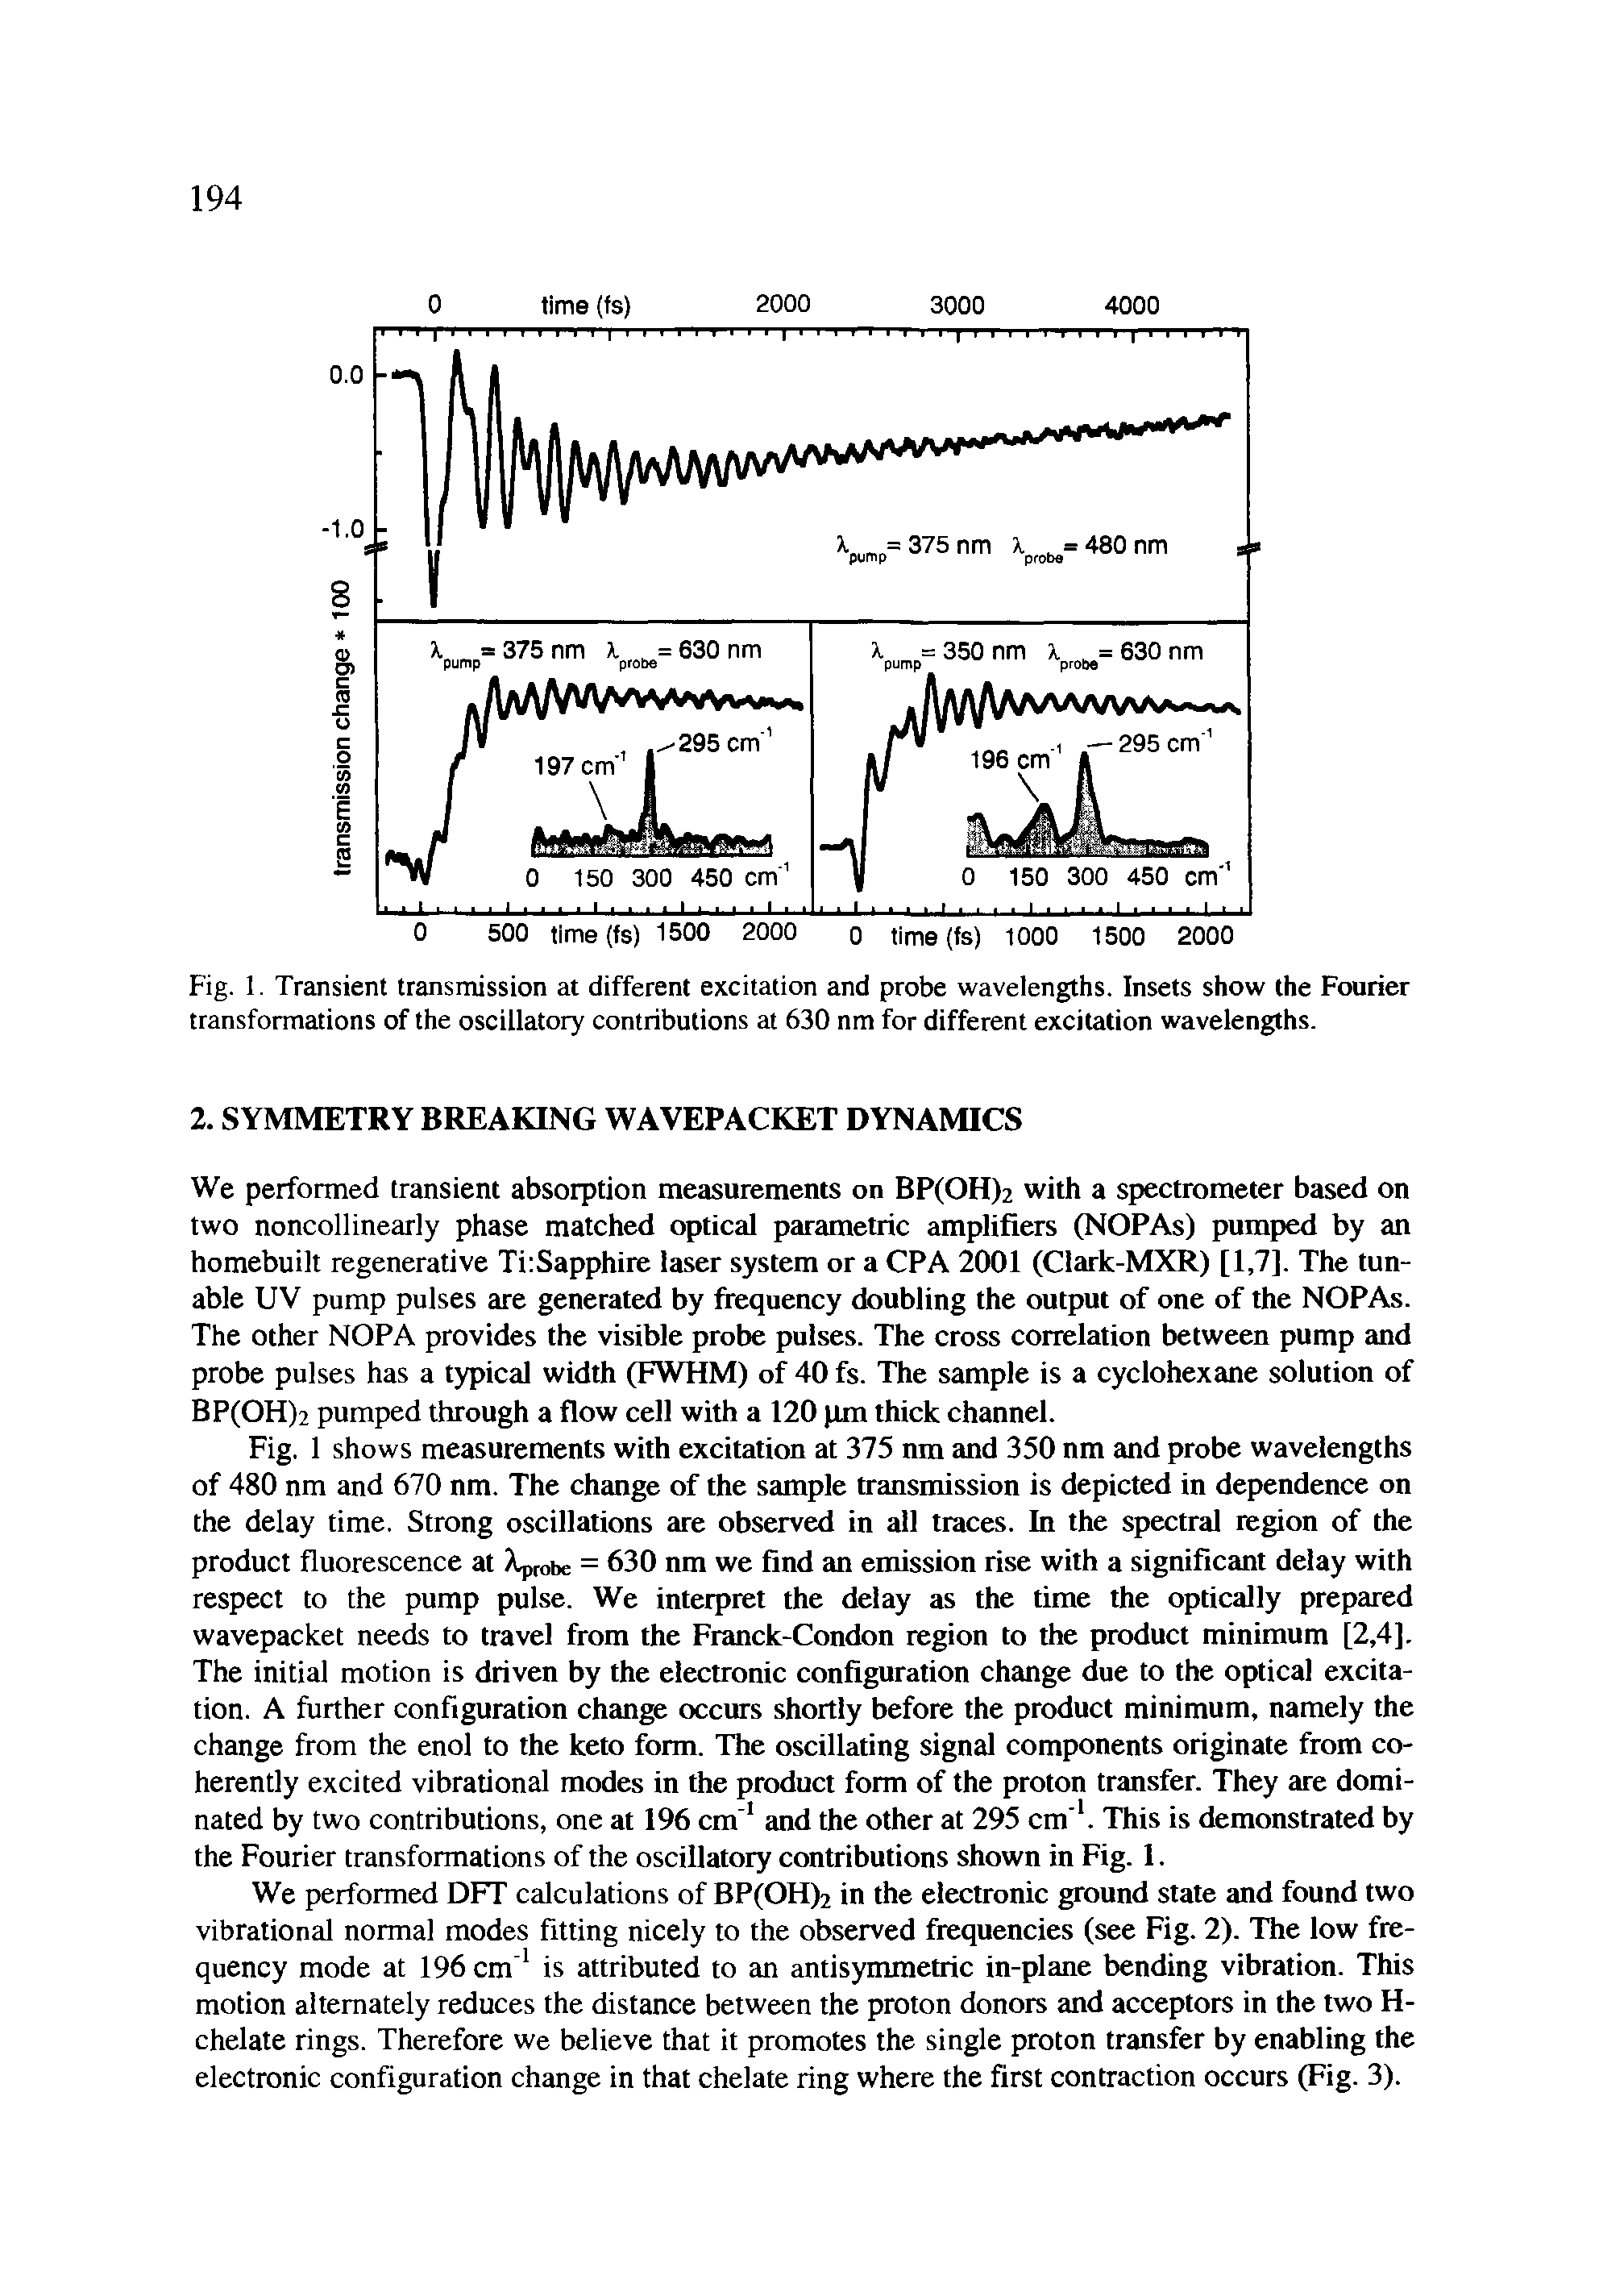 Fig. 1. Transient transmission at different excitation and probe wavelengths. Insets show the Fourier transformations of the oscillatory contributions at 630 nm for different excitation wavelengths.